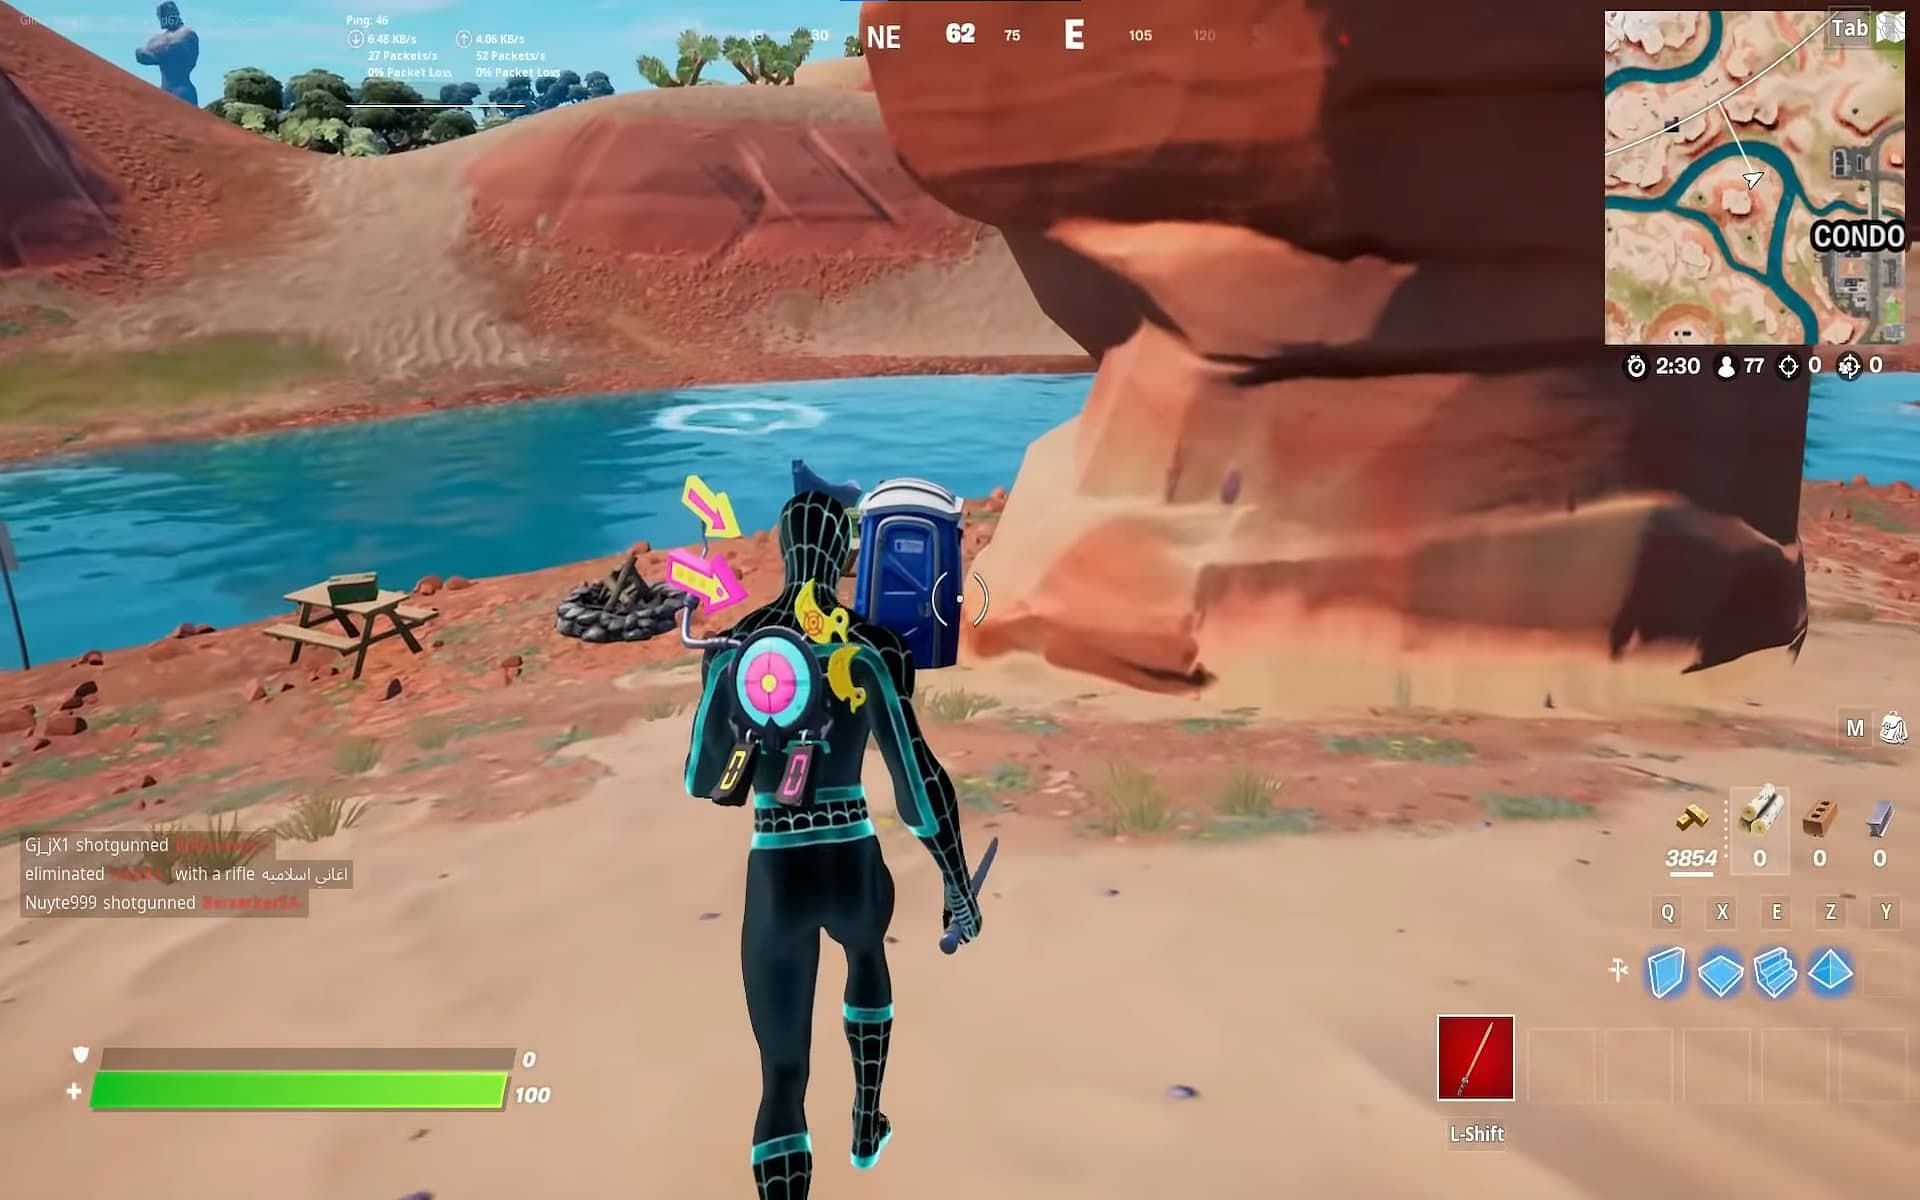 A player approaching the killer toilet in Fortnite. (Image via Epic Games/GKI)